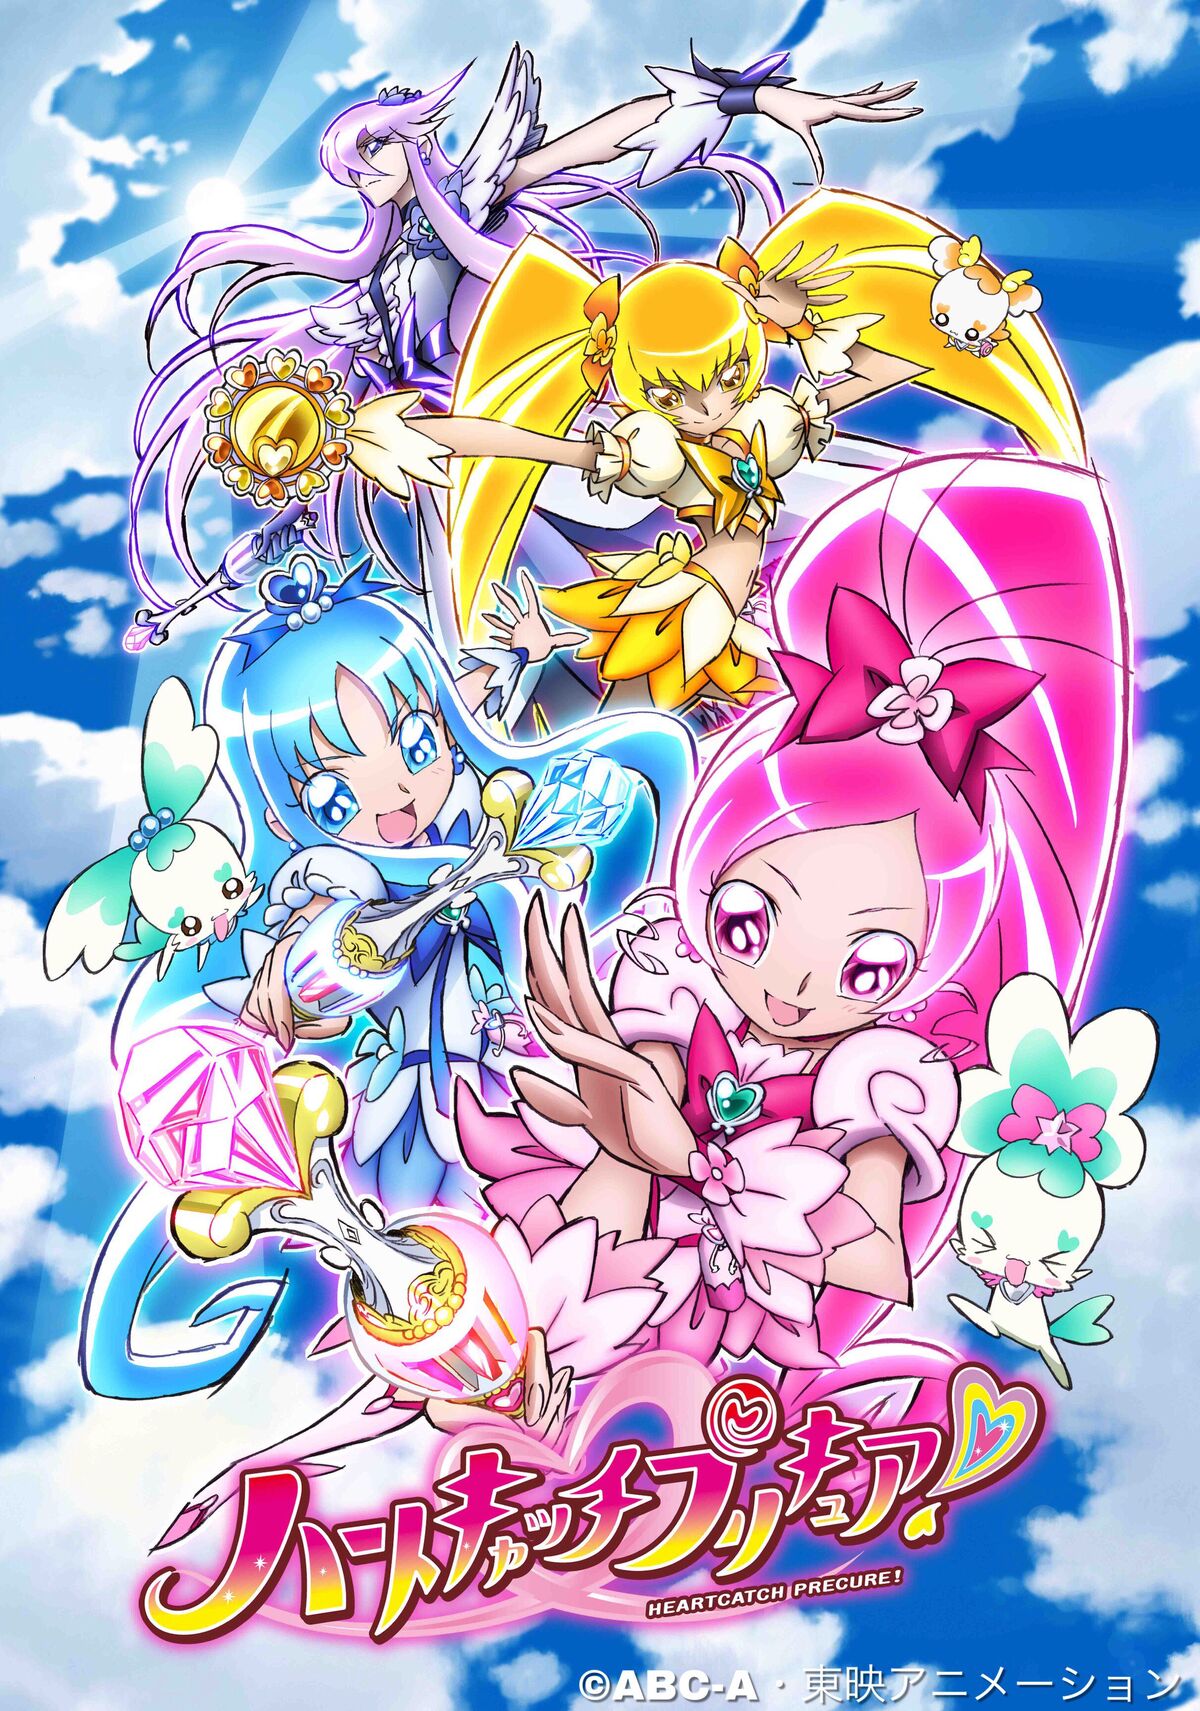 Precure Franchise Gets First Stage Play Featuring High School Boys